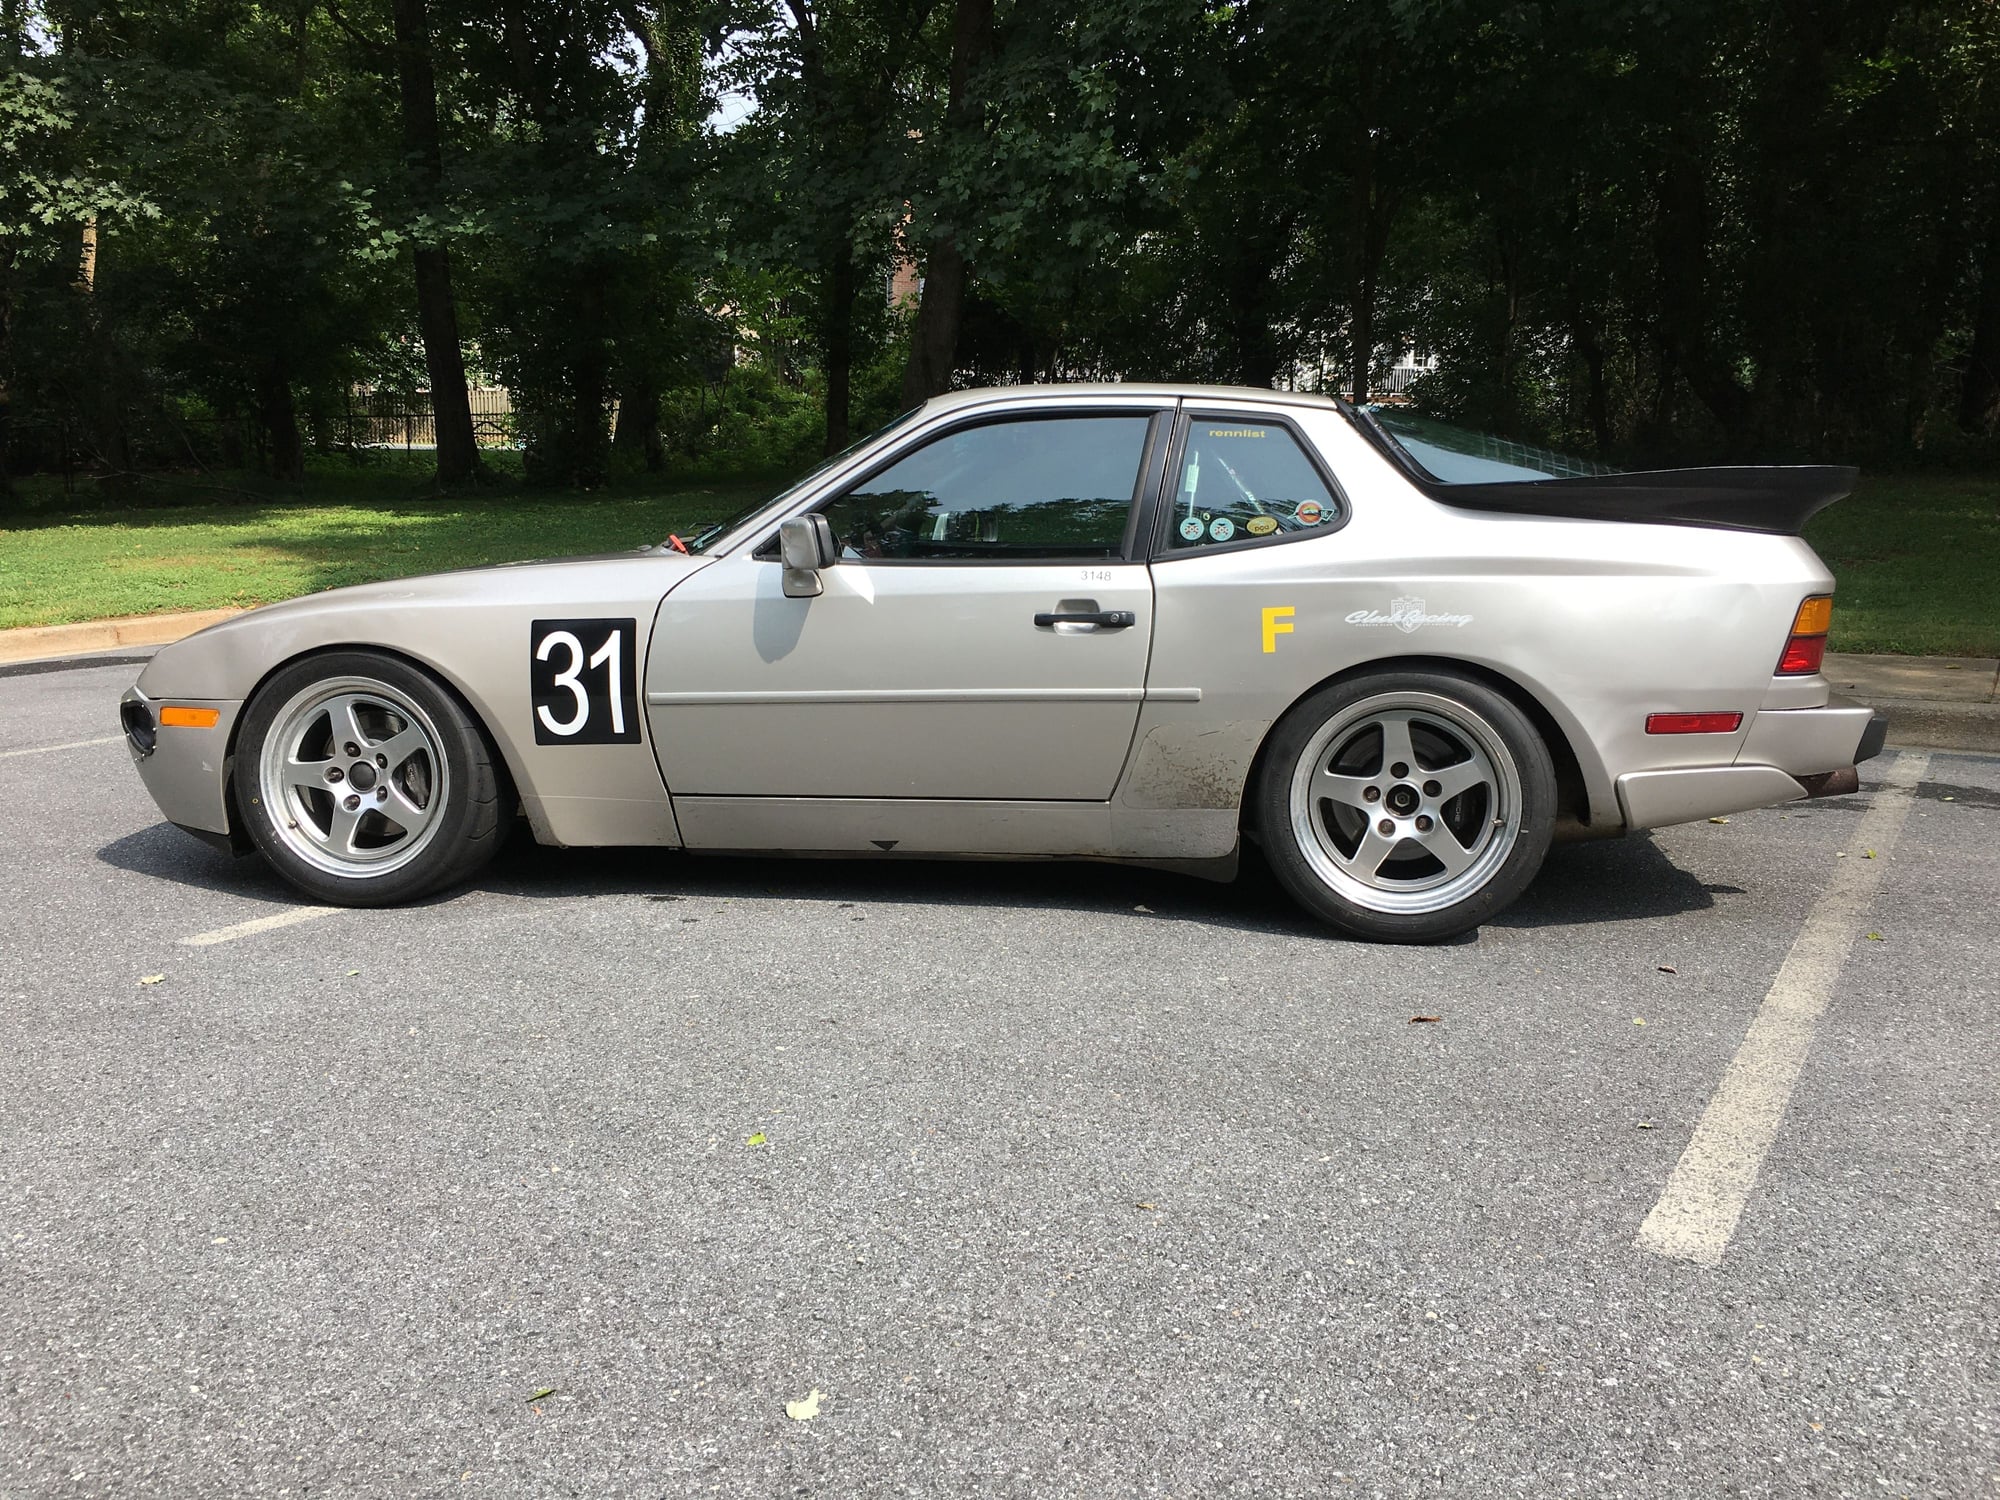 1989 Porsche 944 - FS: 944 TurboS stock-class track car. PCA F-class or SP3 - Long-term owner - Used - VIN WPOAA2954KN151098 - 125,200 Miles - 4 cyl - 2WD - Manual - Coupe - Silver - Rockville, MD 20854, United States